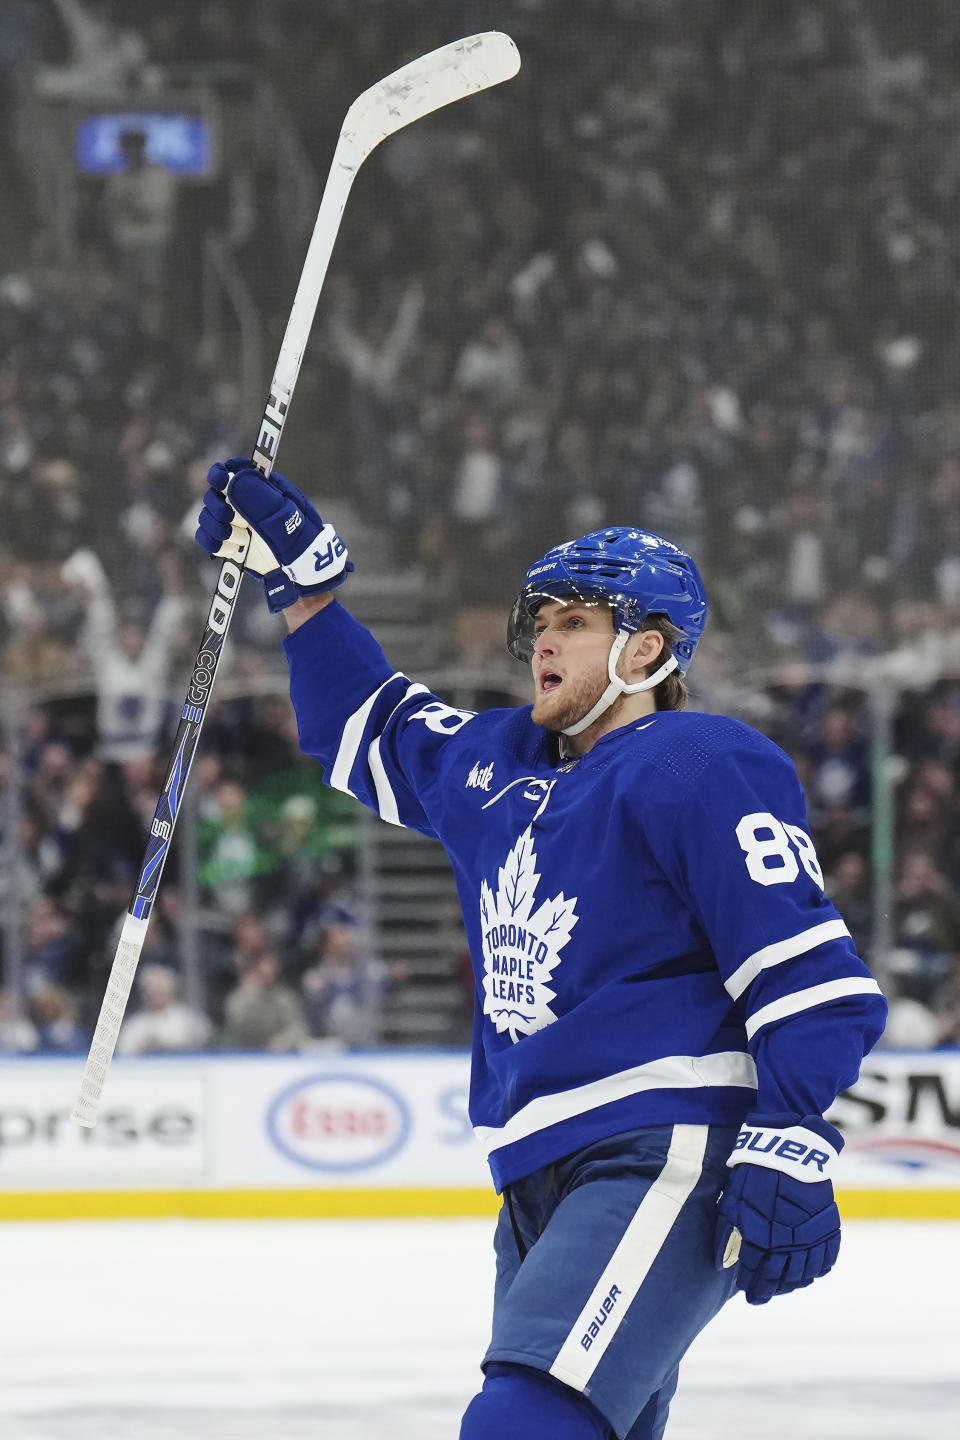 Toronto Maple Leafs right wing William Nylander celebrates his goal against the Tampa Bay Lightning during the second period of Game 1 of a first-round NHL hockey playoff series Tuesday, April 18, 2023, in Toronto. (Nathan Denette/The Canadian Press via AP)